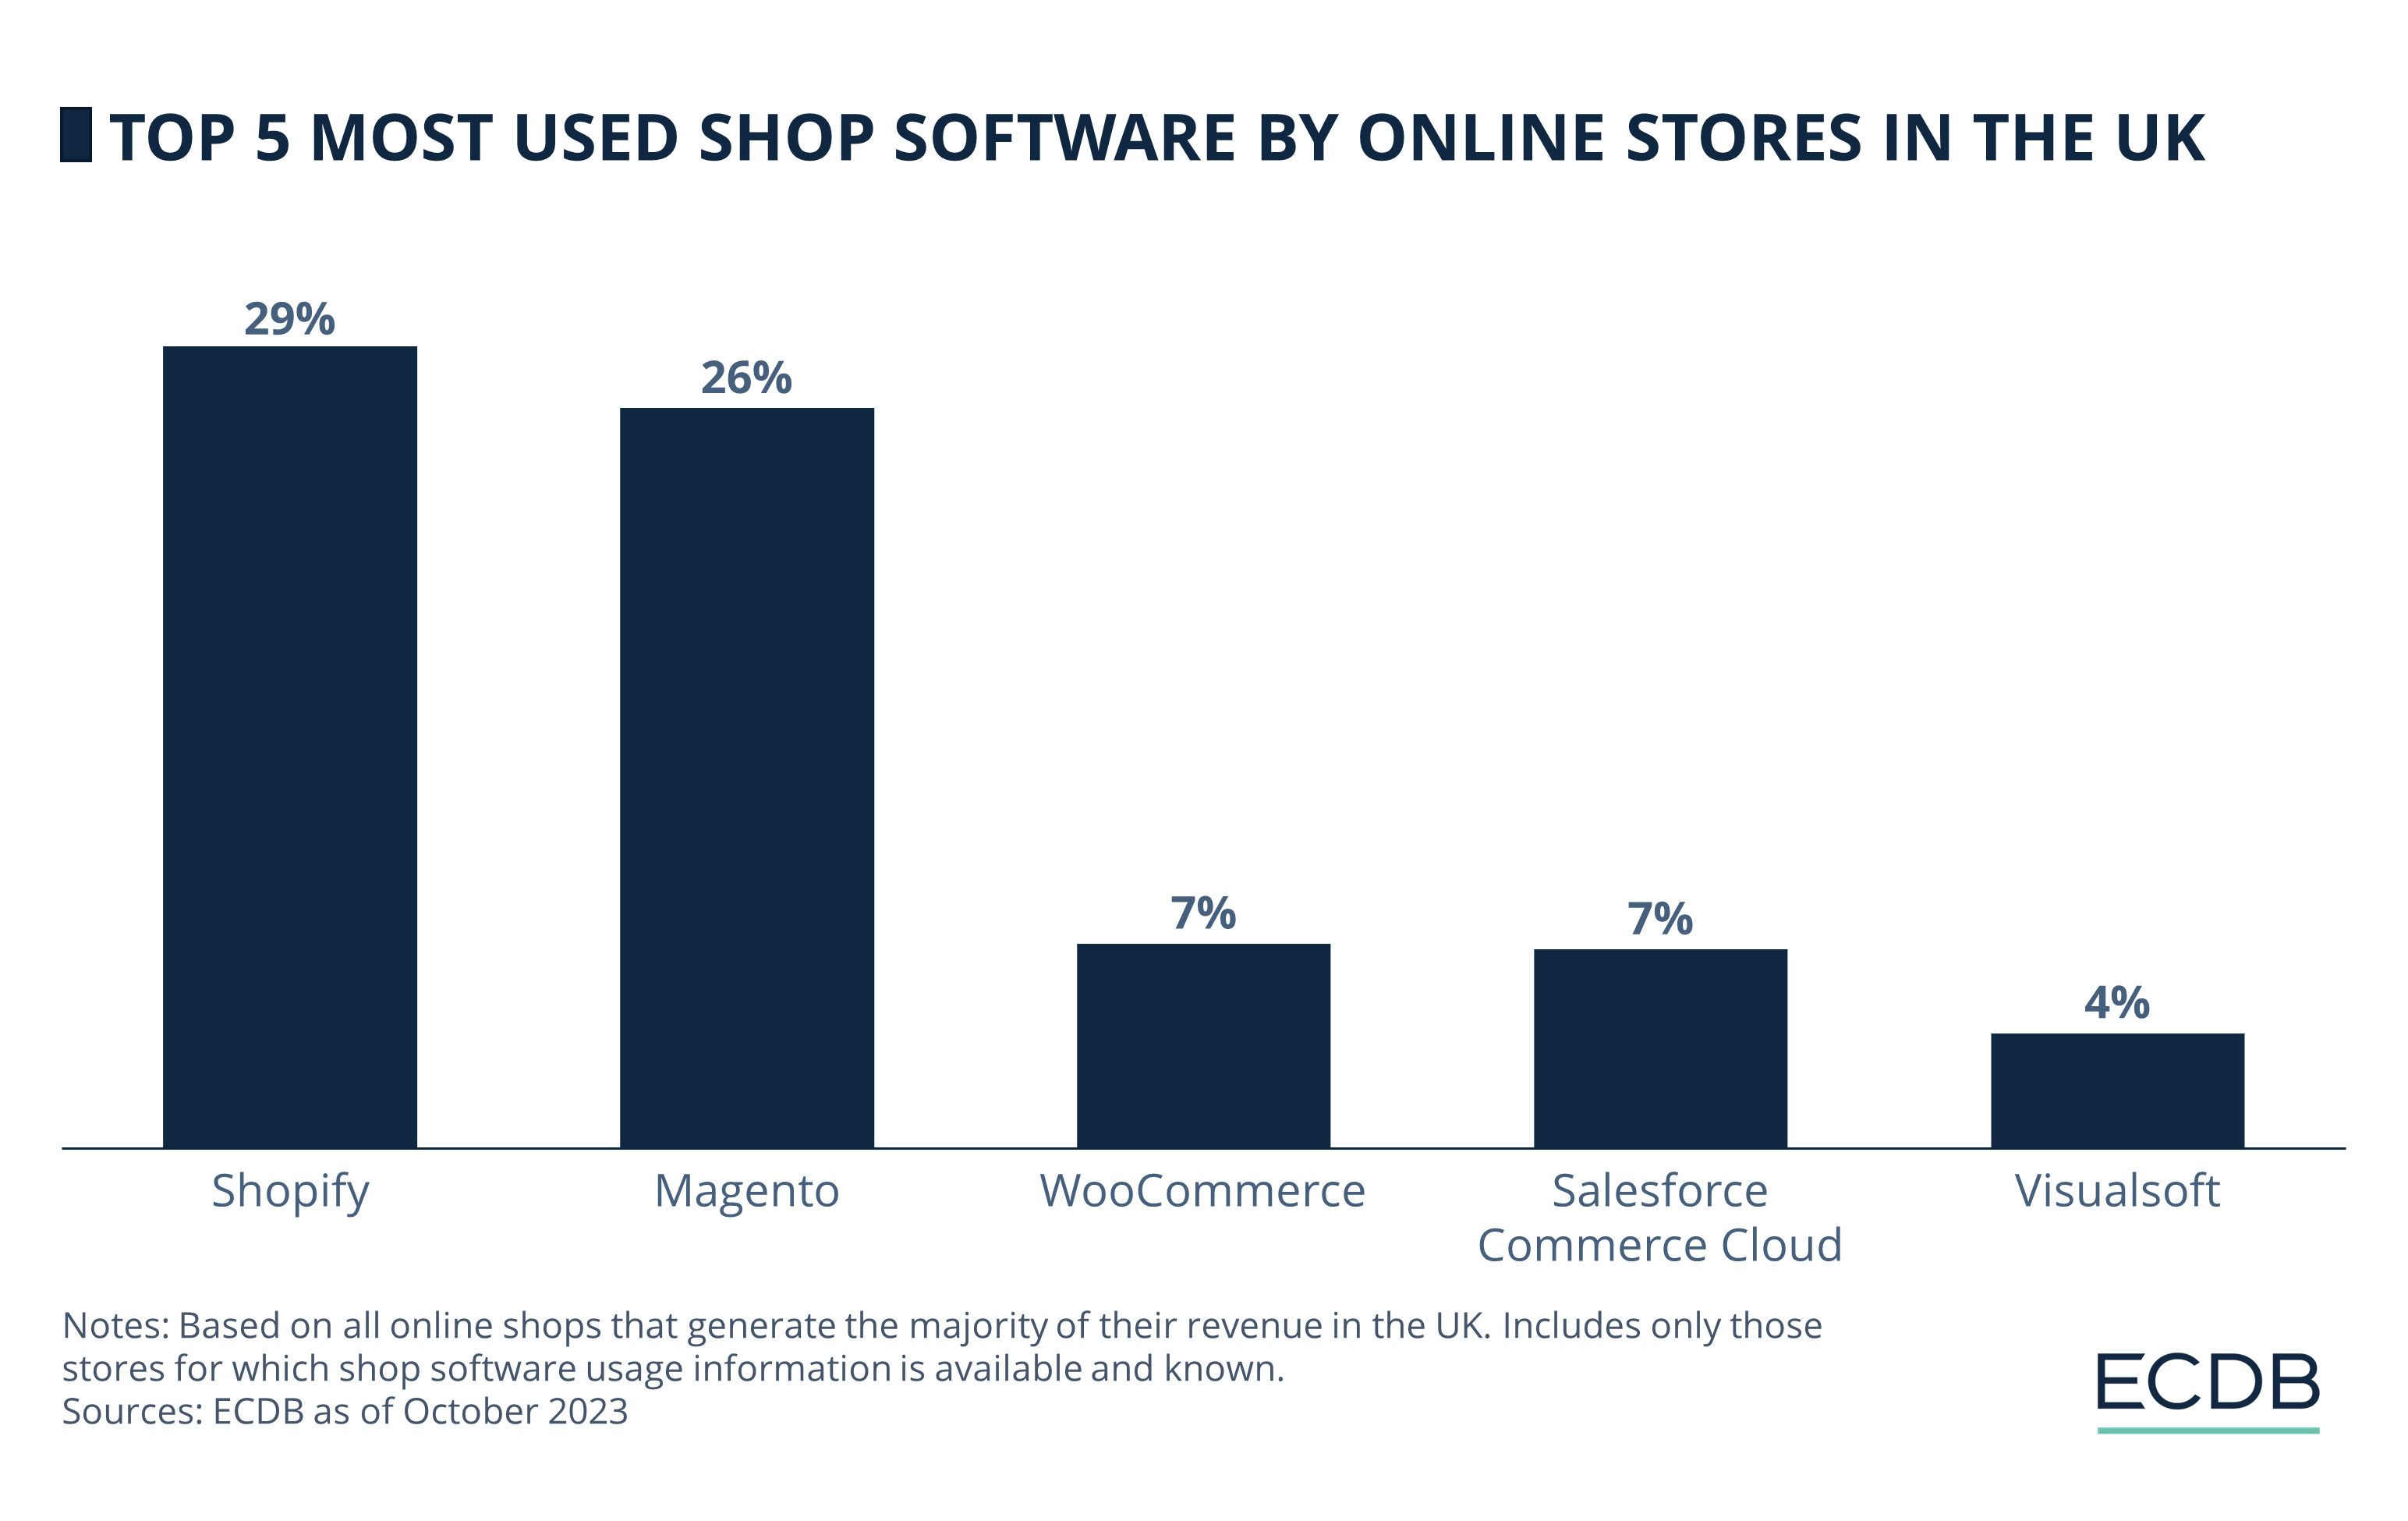 Top 5 Most Used Shop Software by Online Stores in the UK